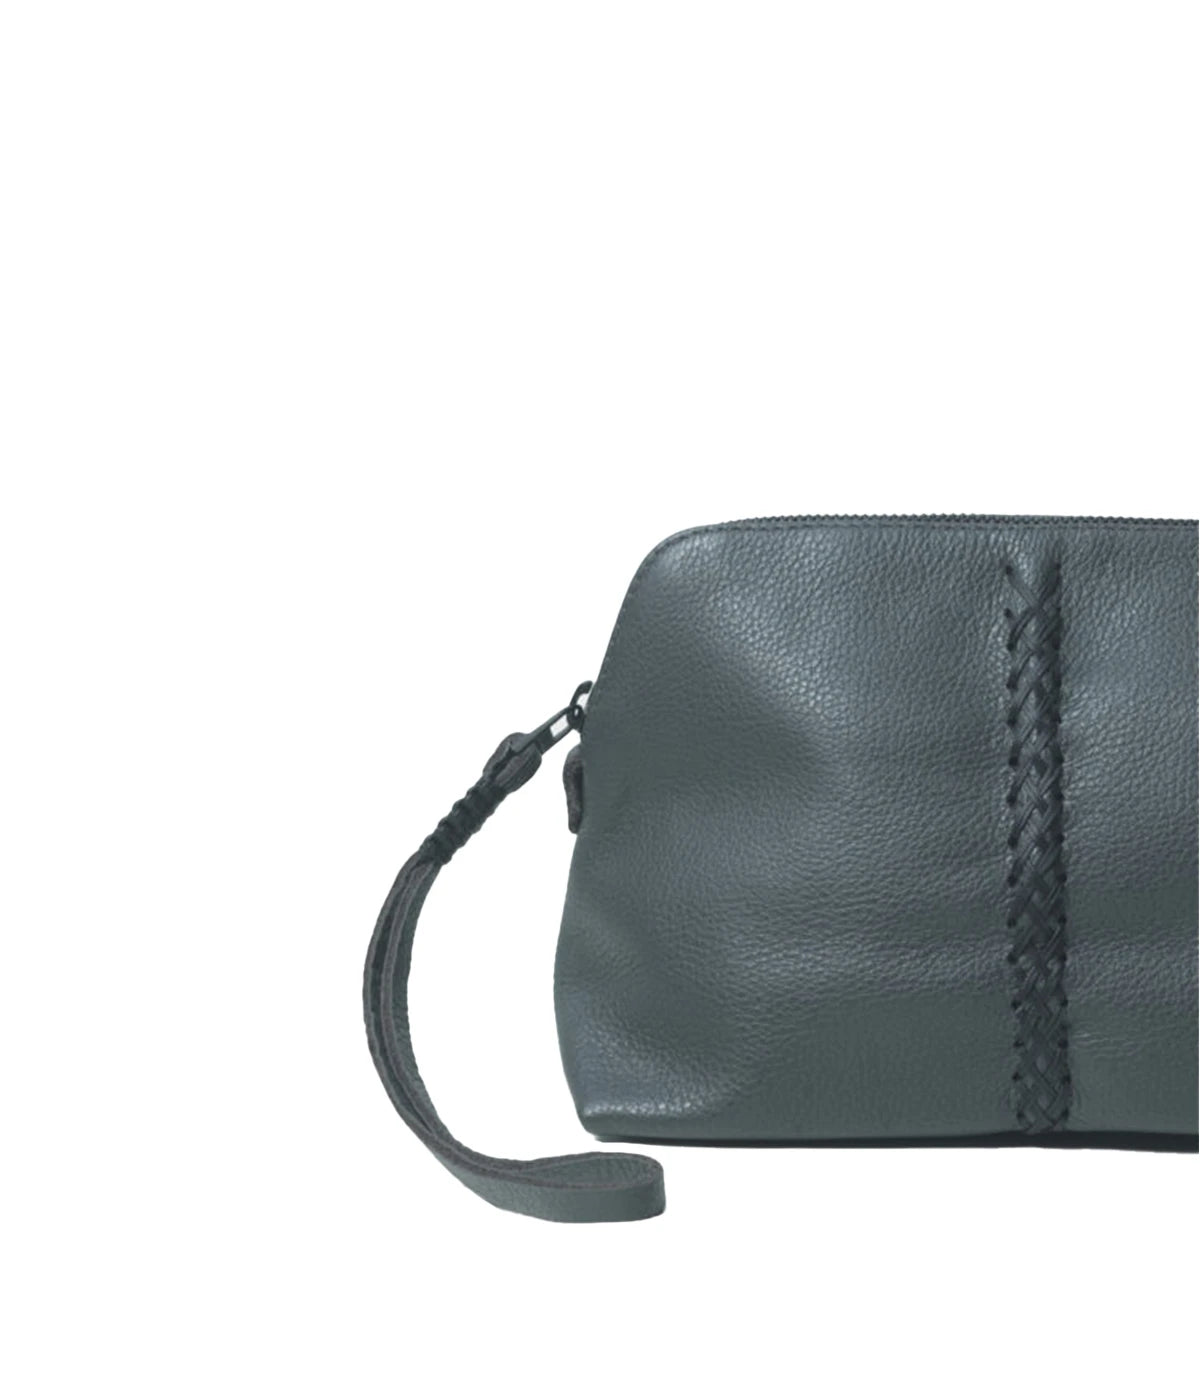 Maxi Vanity Case in Charcoal Grained Leather